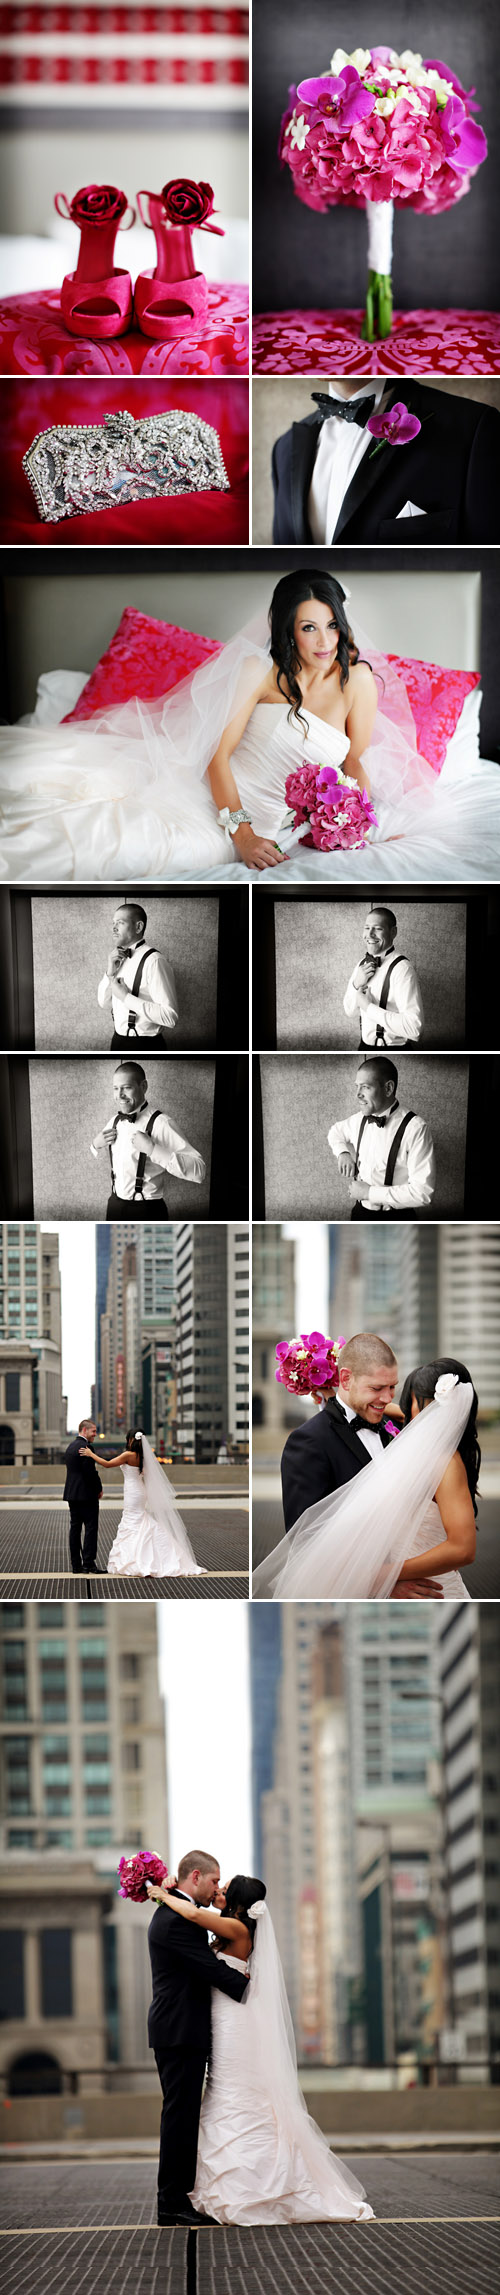 modern chicago real wedding at the Wit Hotel, pink, white, silver and navy wedding color palette, photos by Chris+Lynn